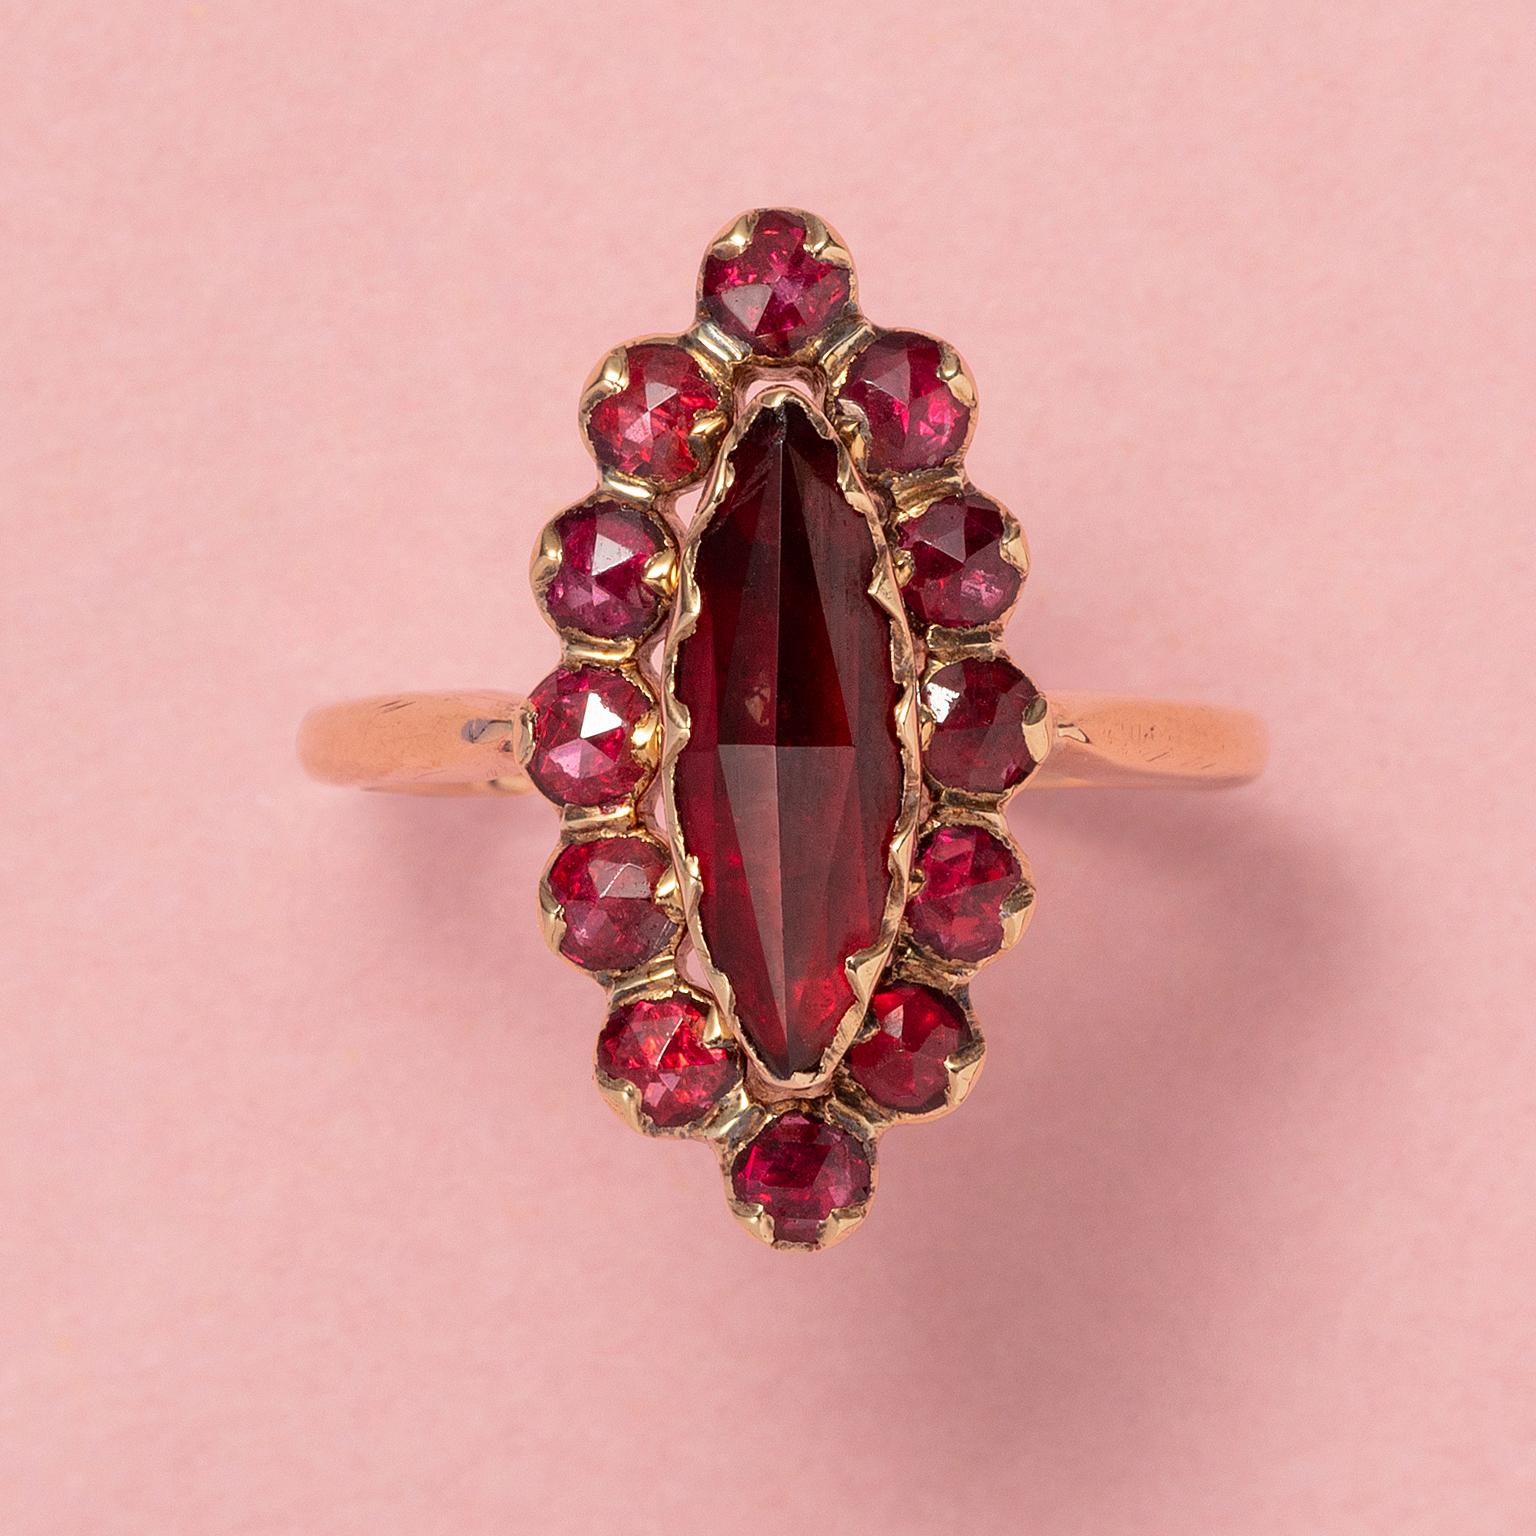 An 18 carat gold navette shaped ring set with rose cut rhodolite garnets on red gold foil, South of France, Perpignan region, early 20st century.

weight: 3.8 grams
dimensions: 2.2 x 1.1 cm
ring size: 18 mm / 8 US